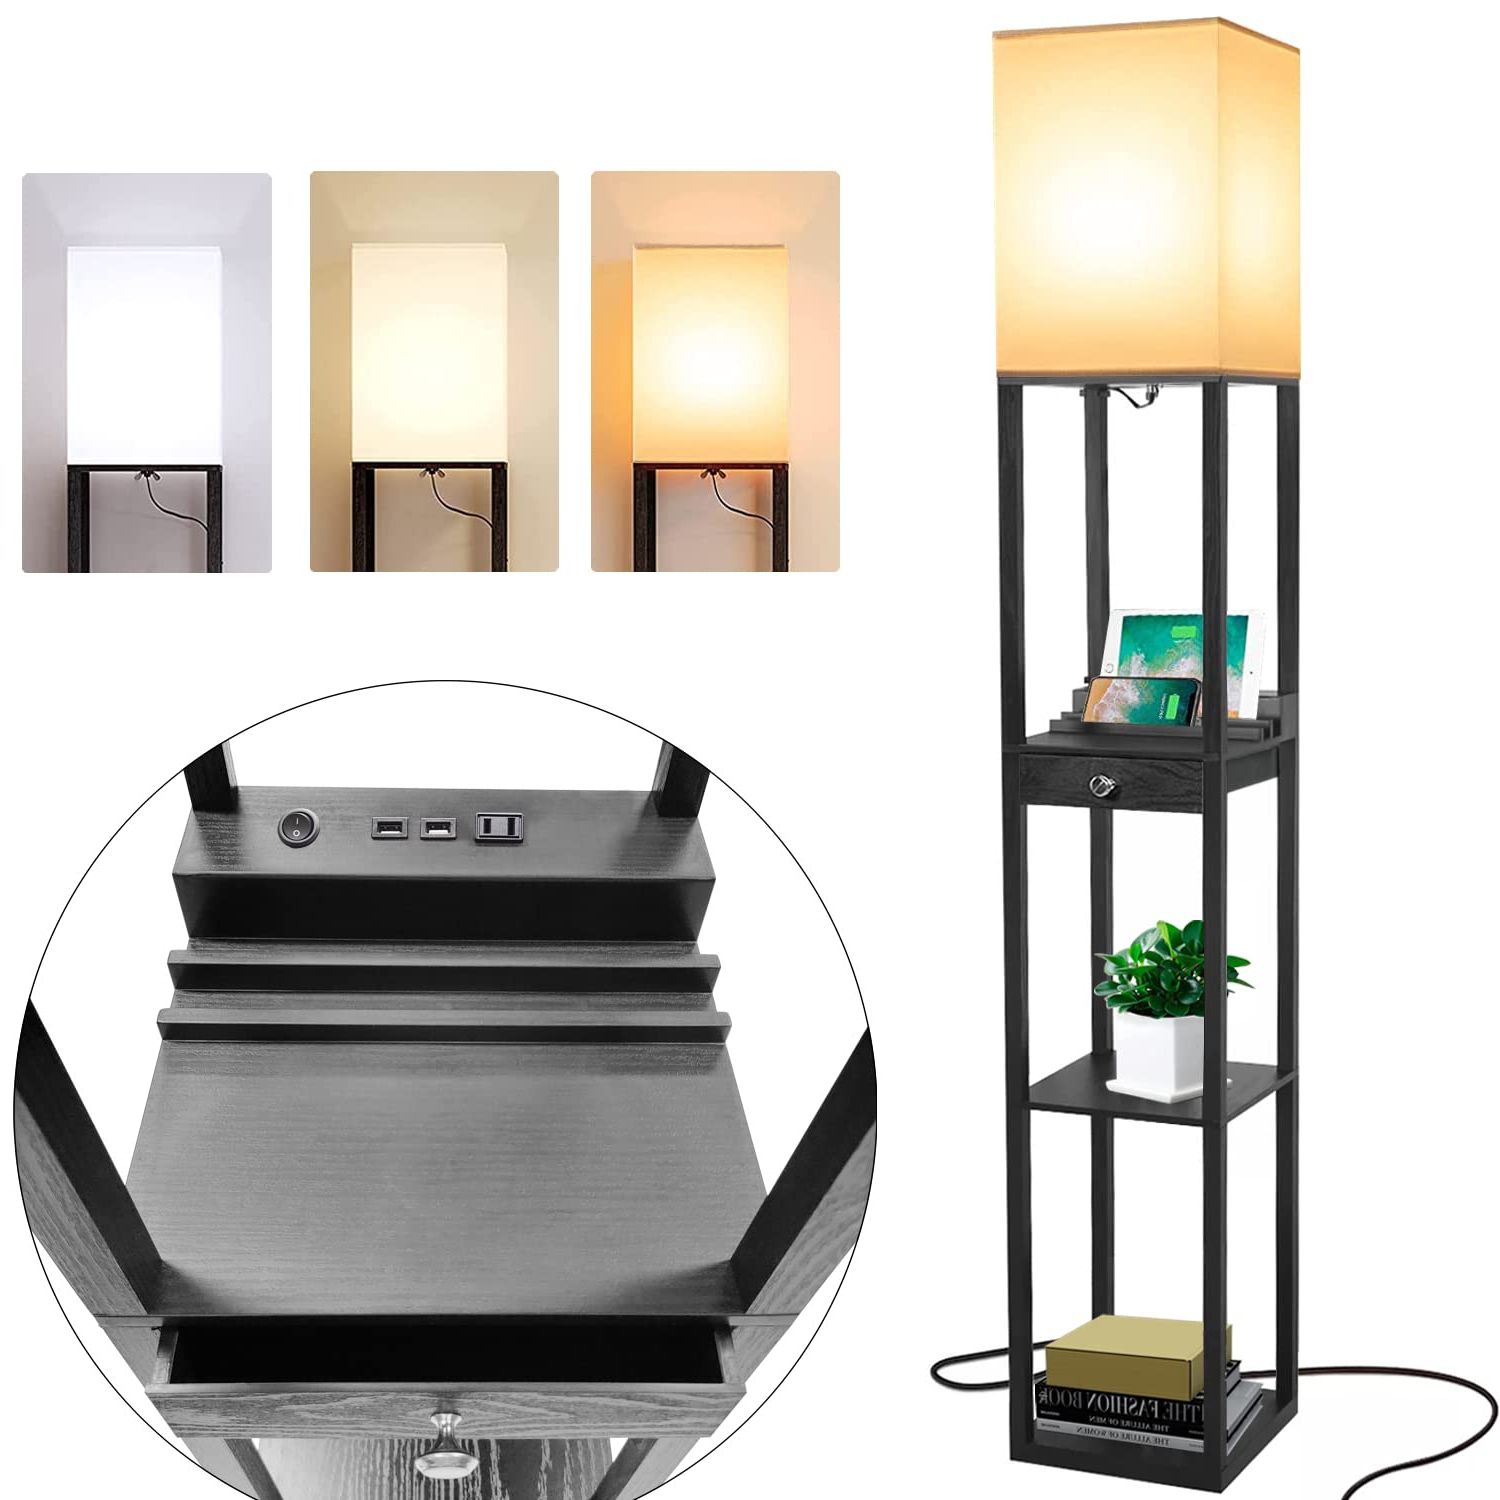 Standing Lamps With Usb Charge Within Preferred Assemer Shelf Floor Lamps For Living Room,tall Standing Lamp With Shelves  And Drawer,2 Usb Charging Ports & Power Outlet,bright 3cct Led Bulb  Included – Black – – Amazon (View 2 of 10)